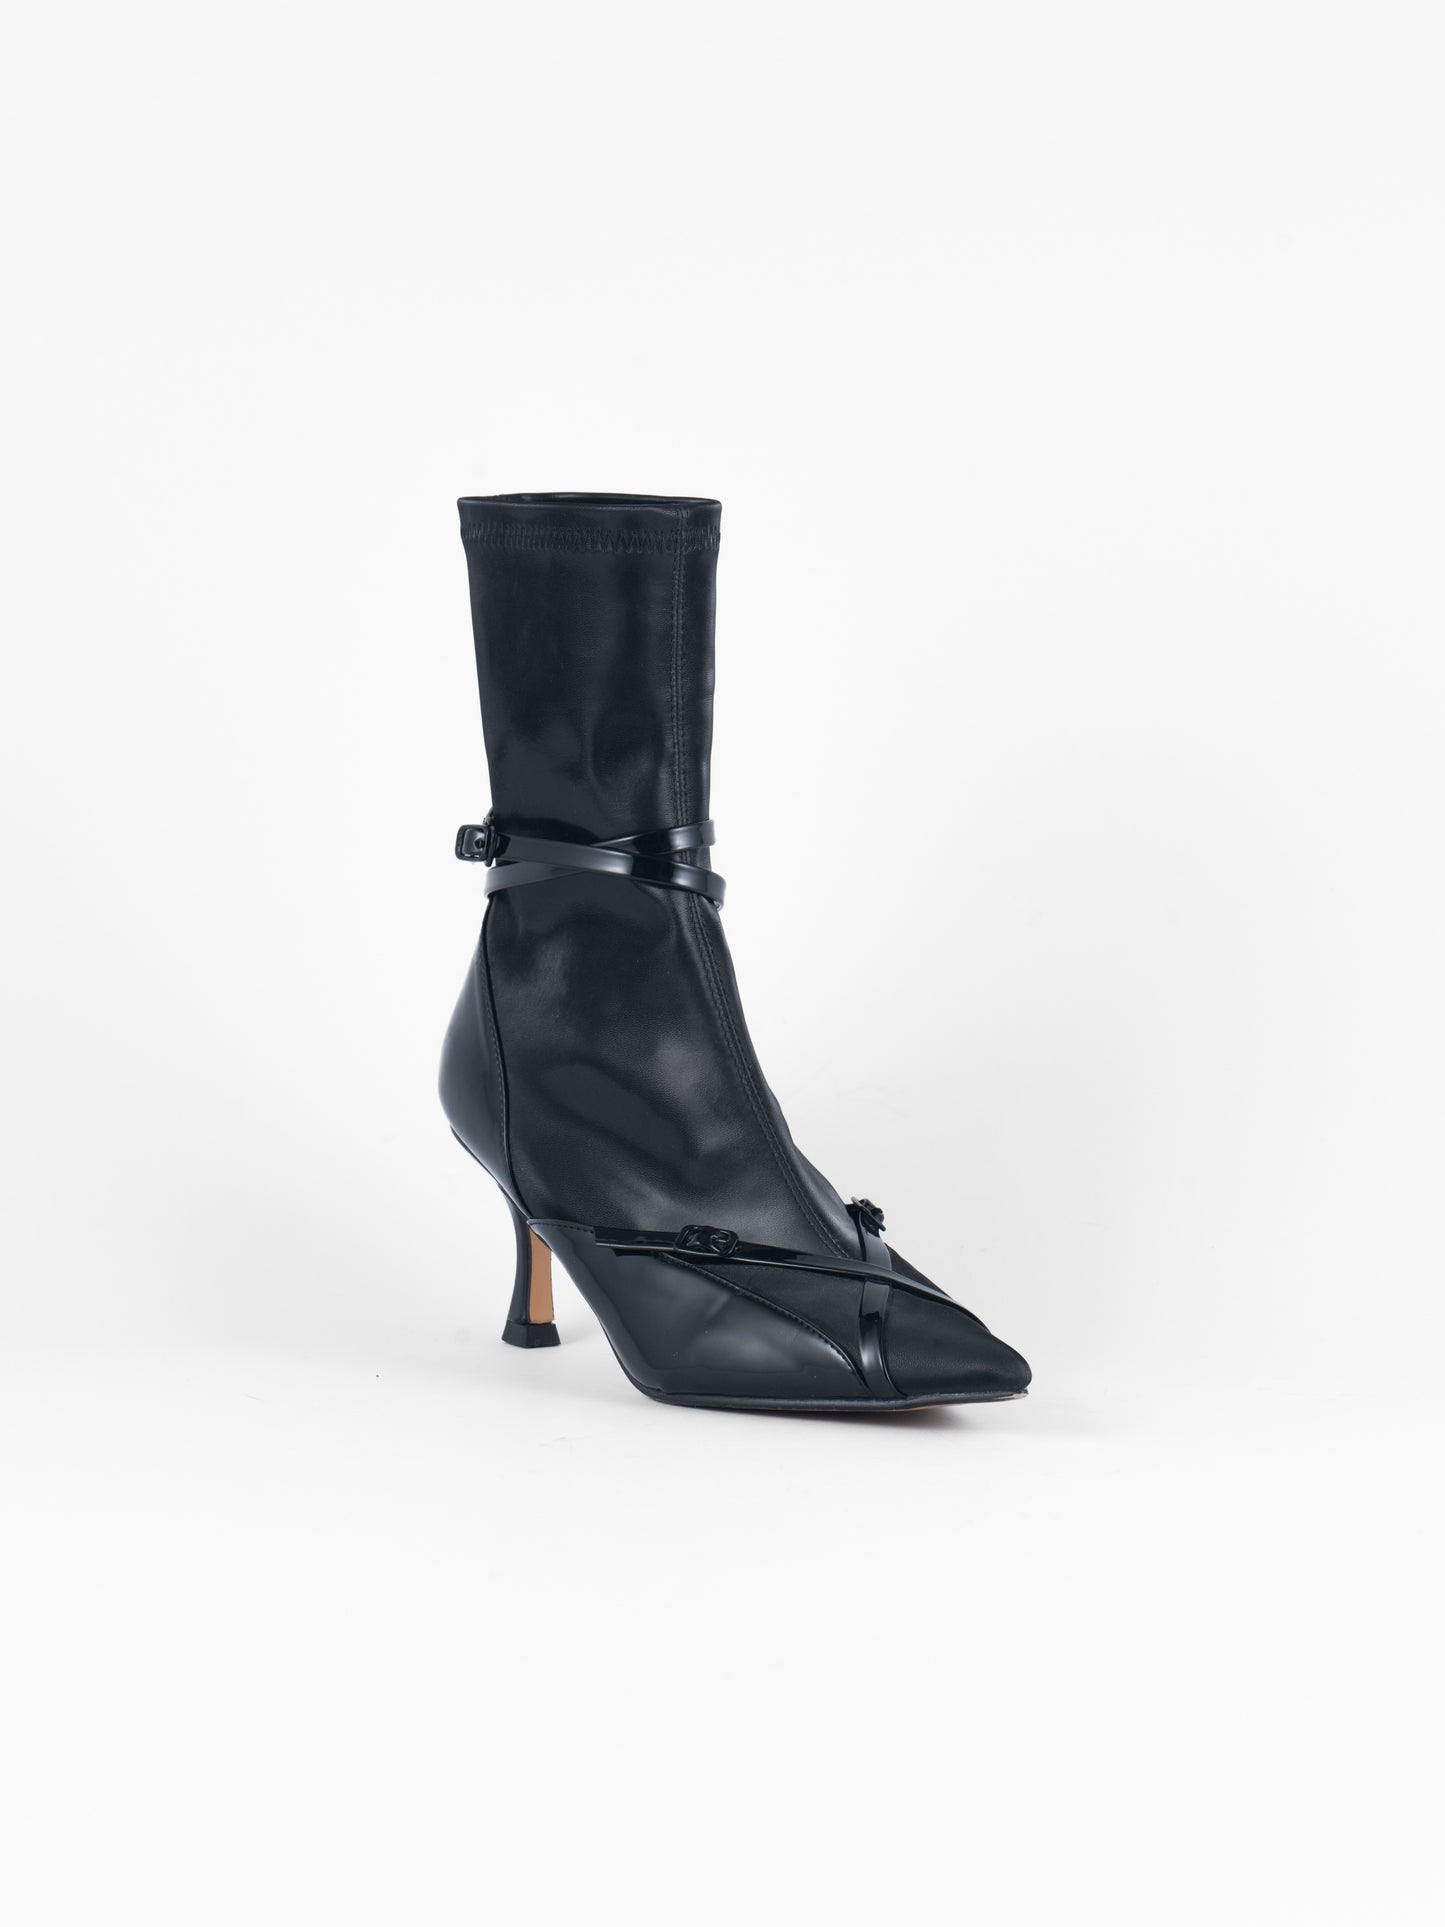 Warrior Ankle Boots - Black